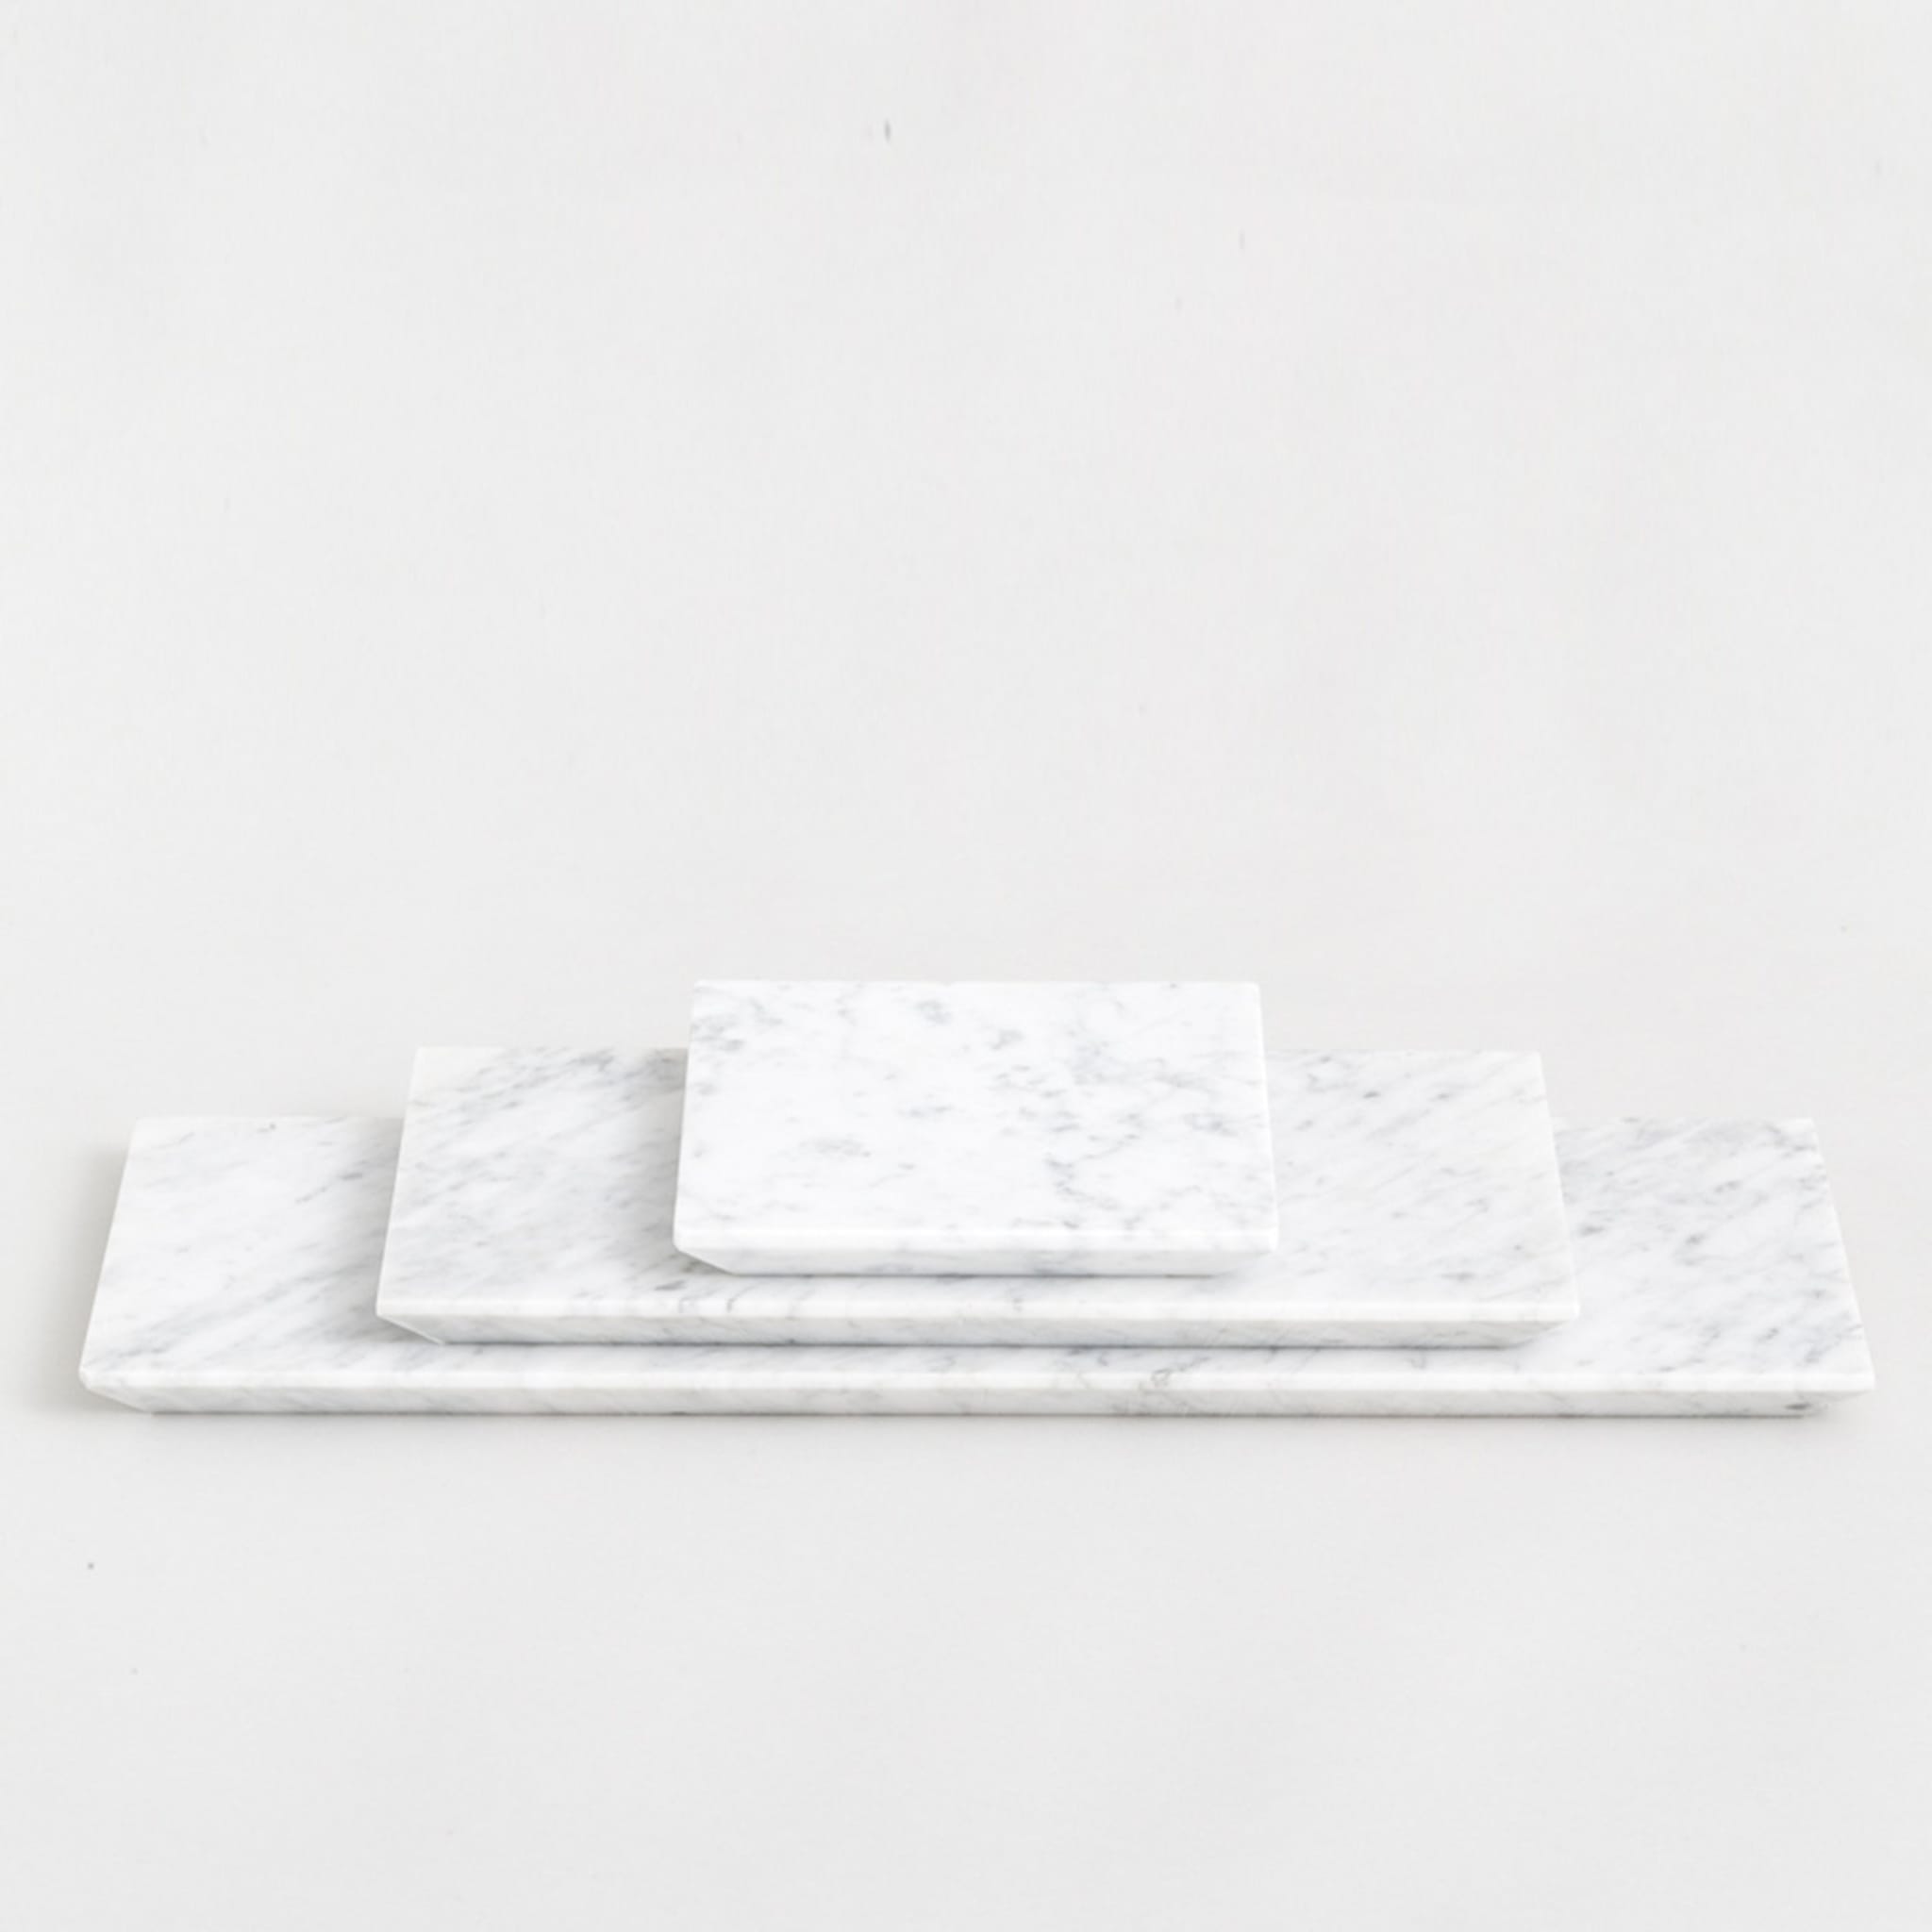 White Marble Set of 3 Cutting Boards - Alternative view 1